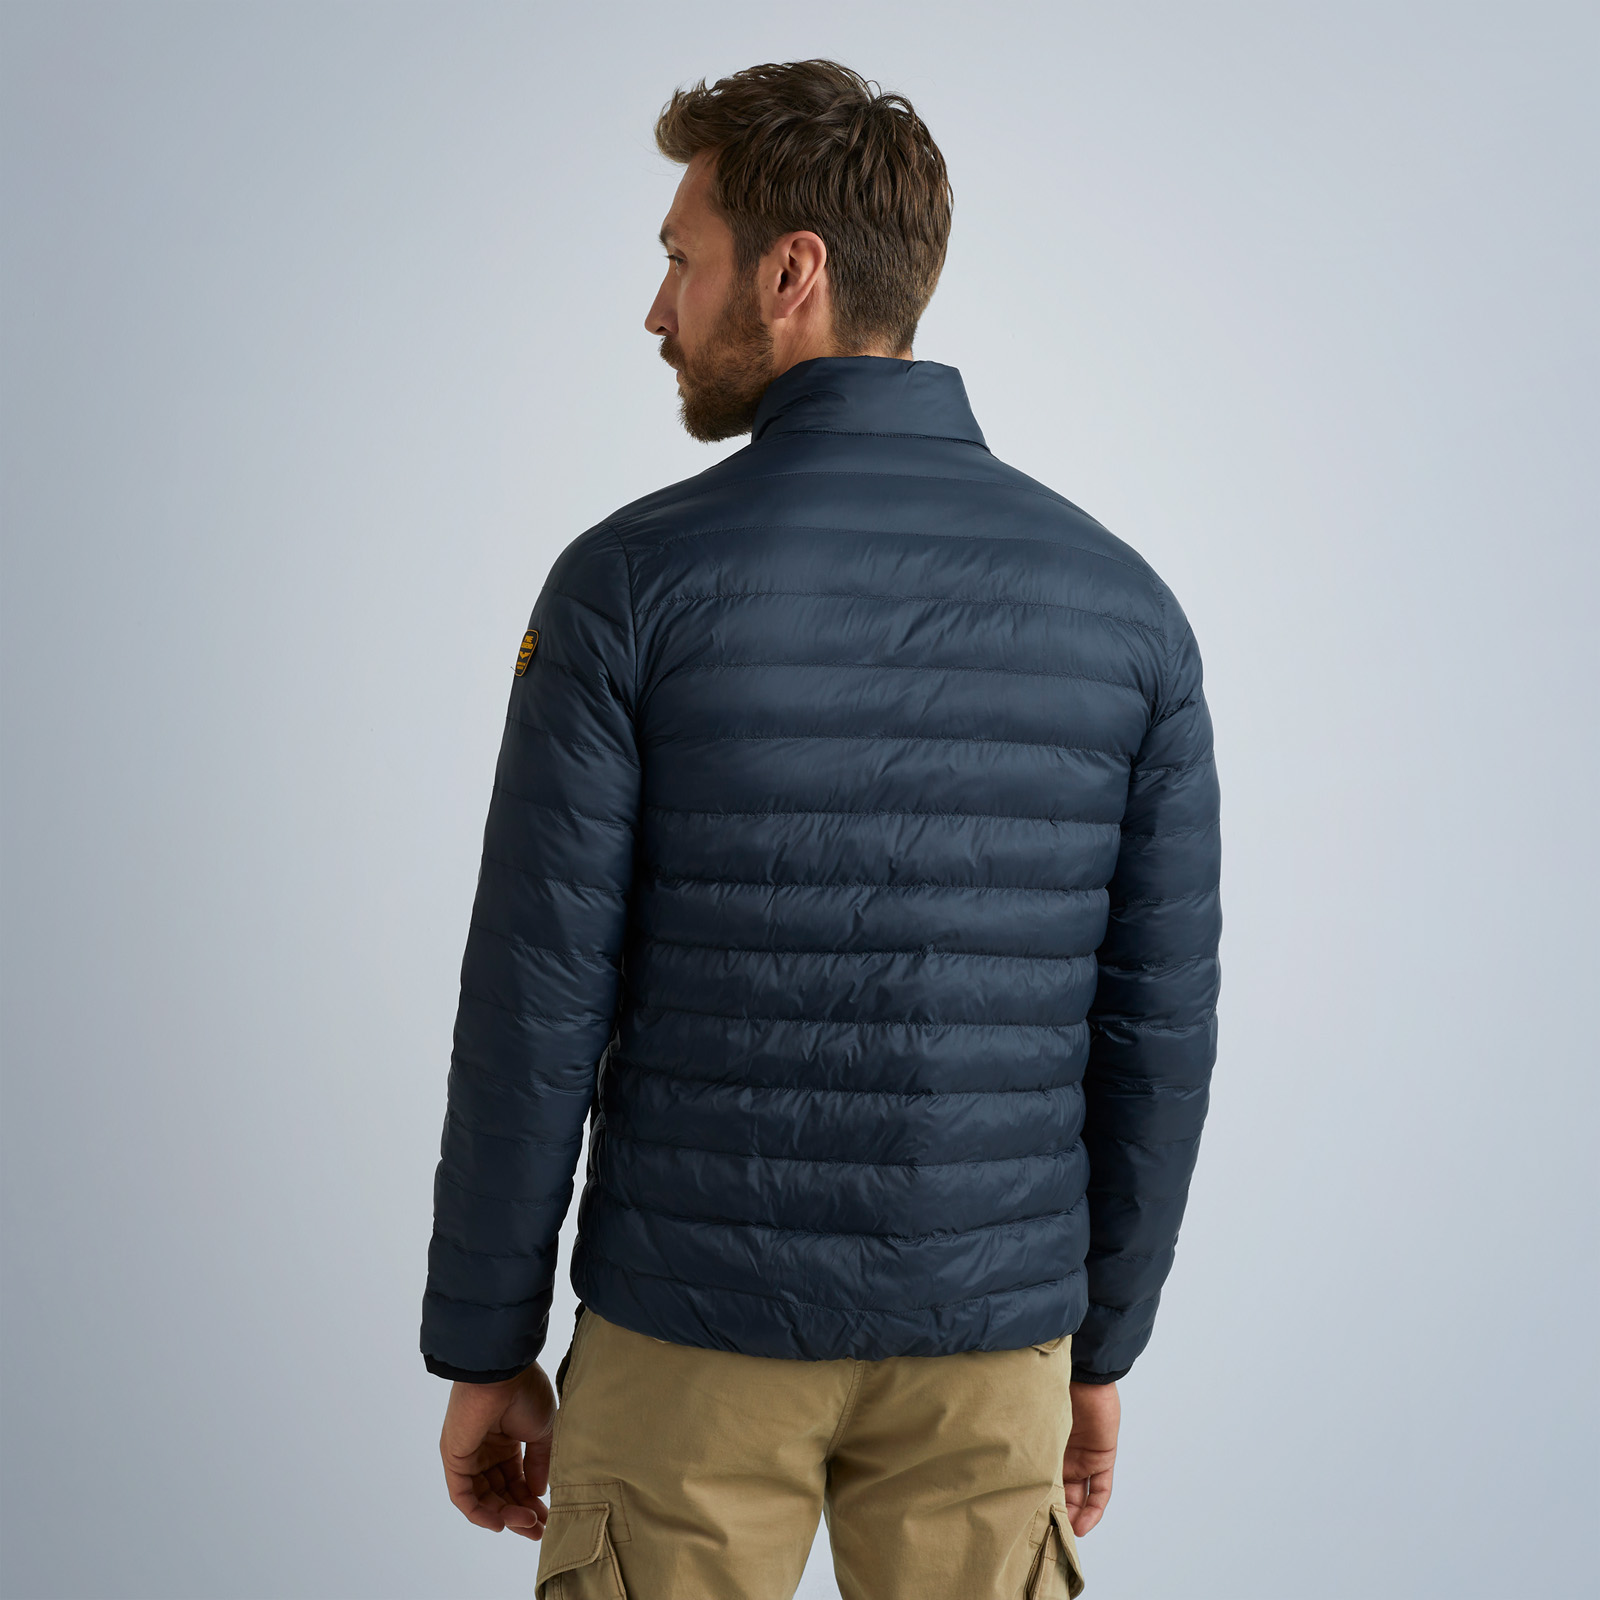 LEGEND | Miles Mentor Jacket | shipping and returns